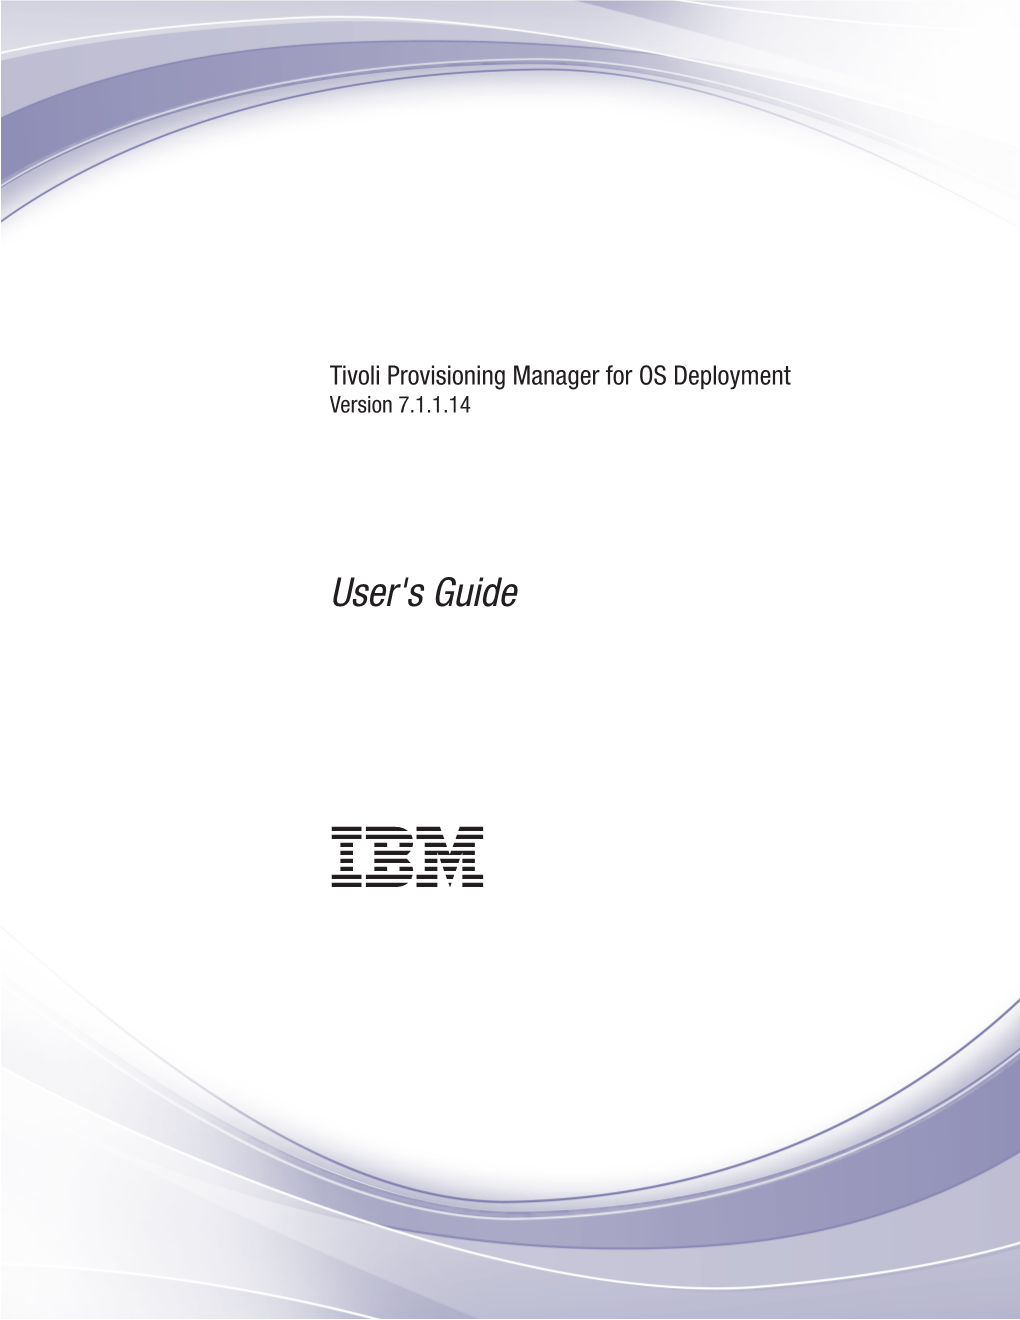 Tivoli Provisioning Manager for OS Deployment: User's Guide Contents